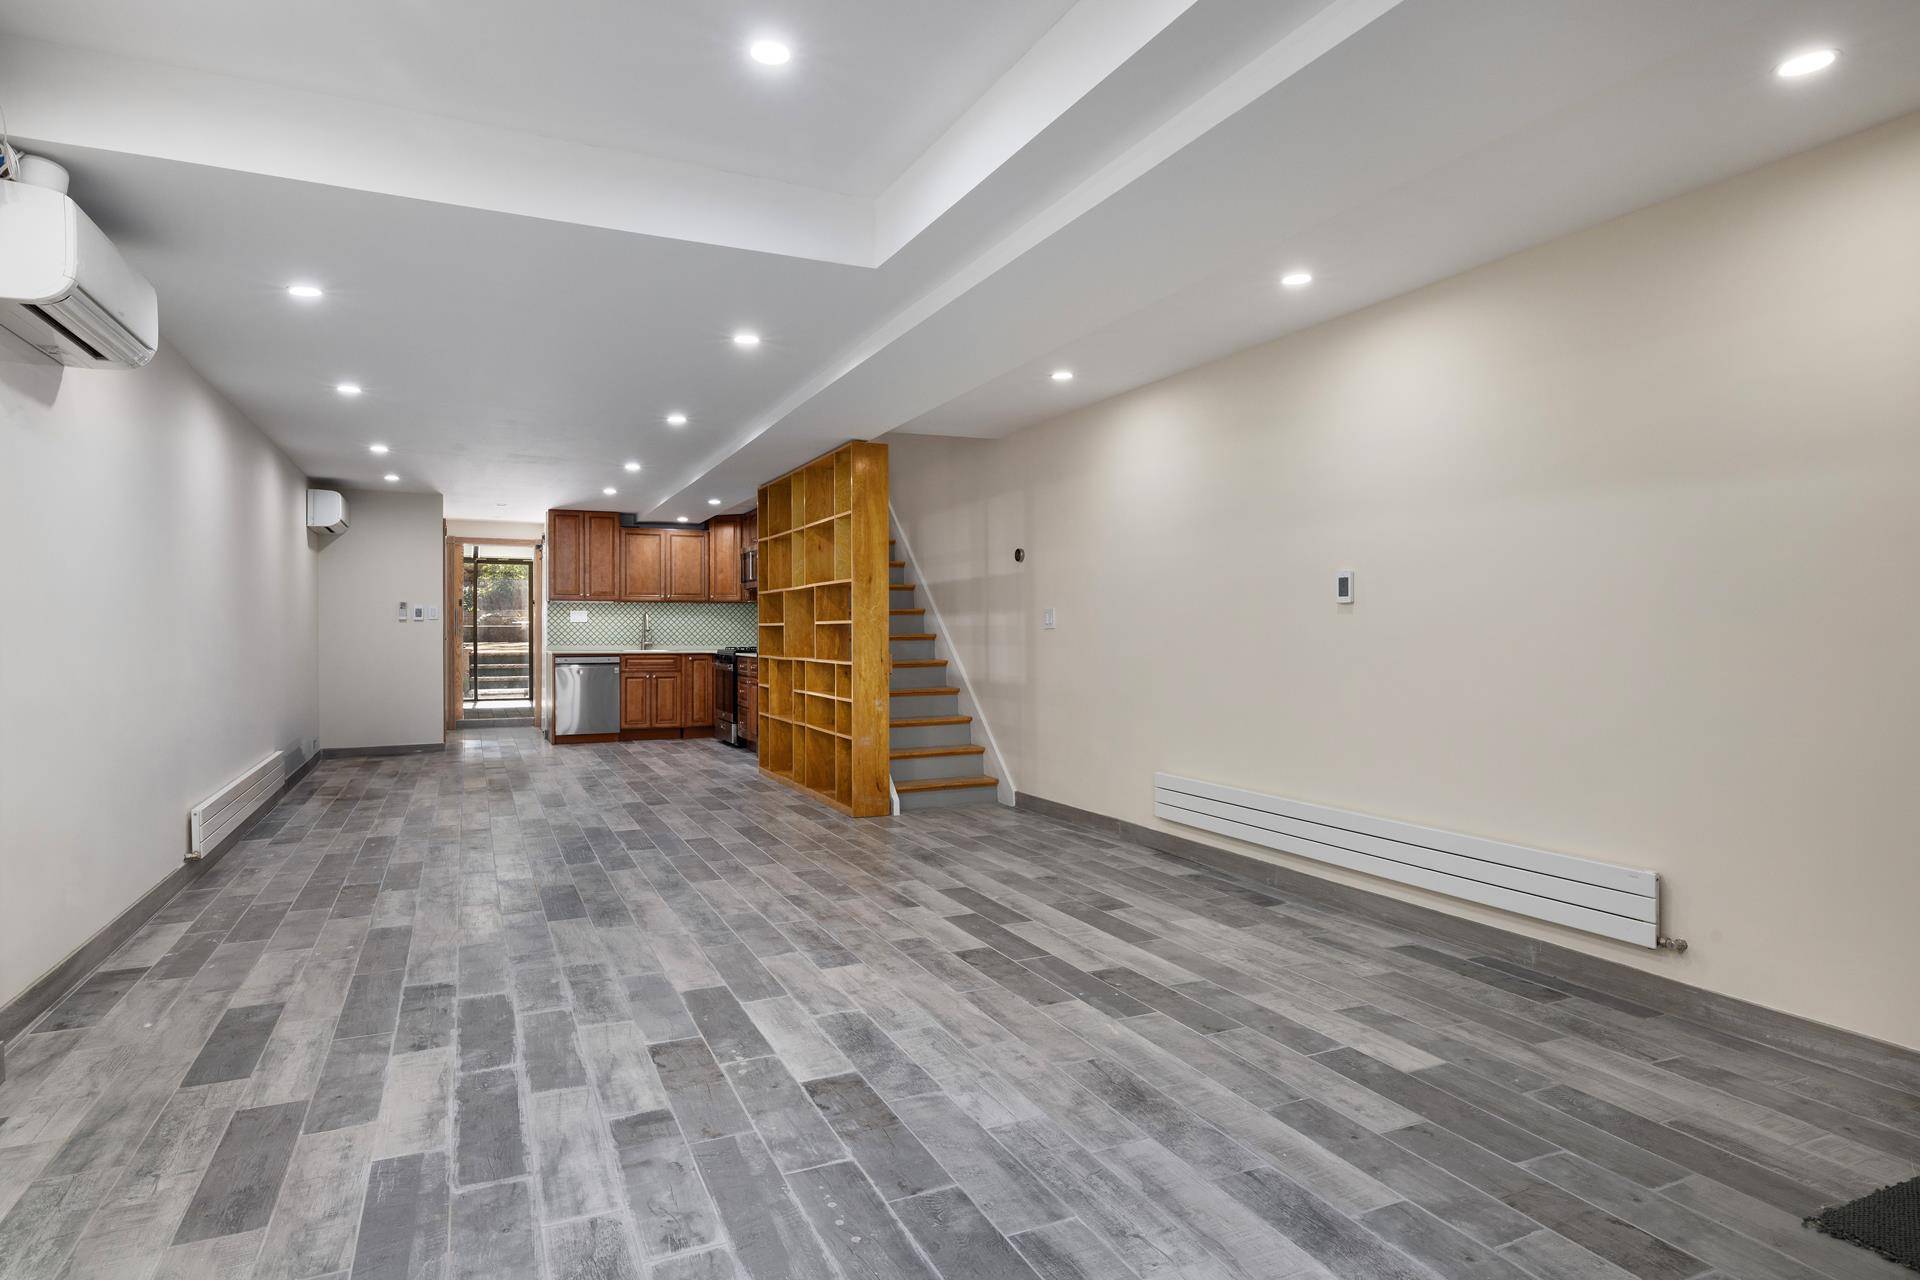 Available Immediately Incredible opportunity to rent a 1 Bedroom with Windowed Home Office and your own Patio in a renovated 1900's brownstone next to Central Park.